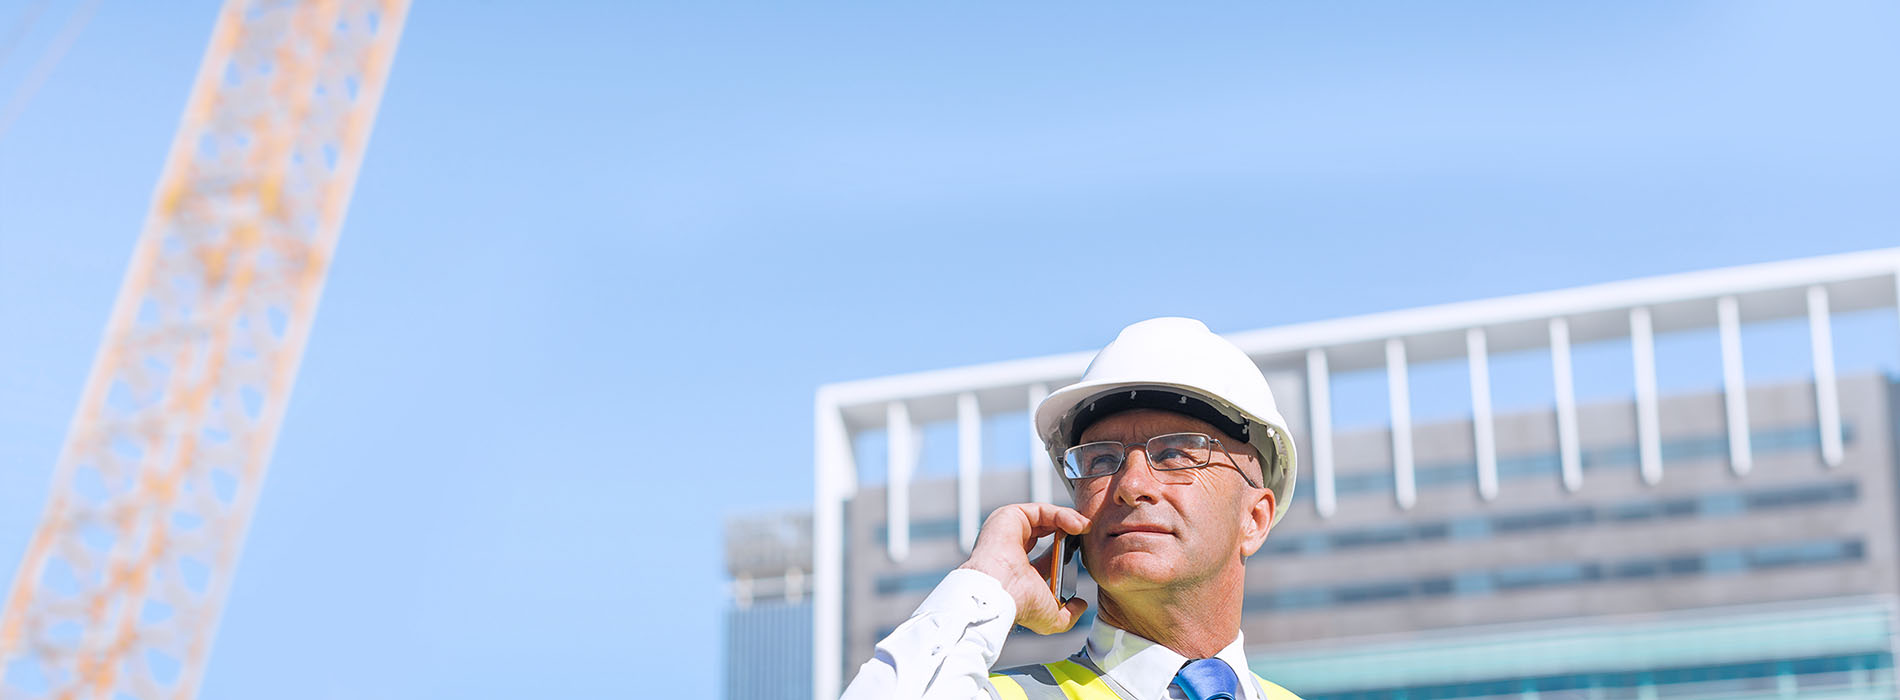 Construction worker talking on smartphone